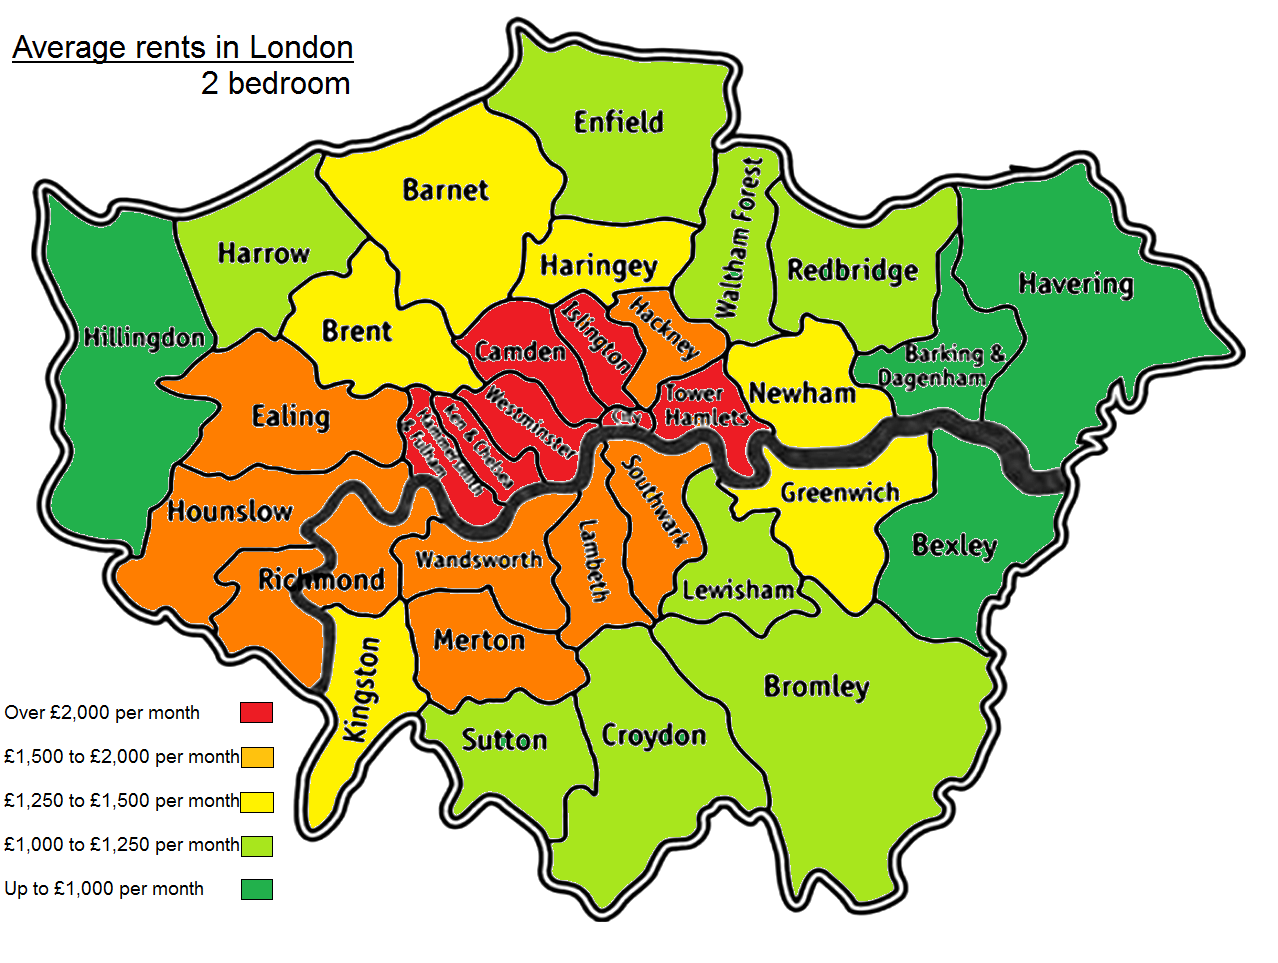 Thick Creamy Discharge: More on Londonland rents